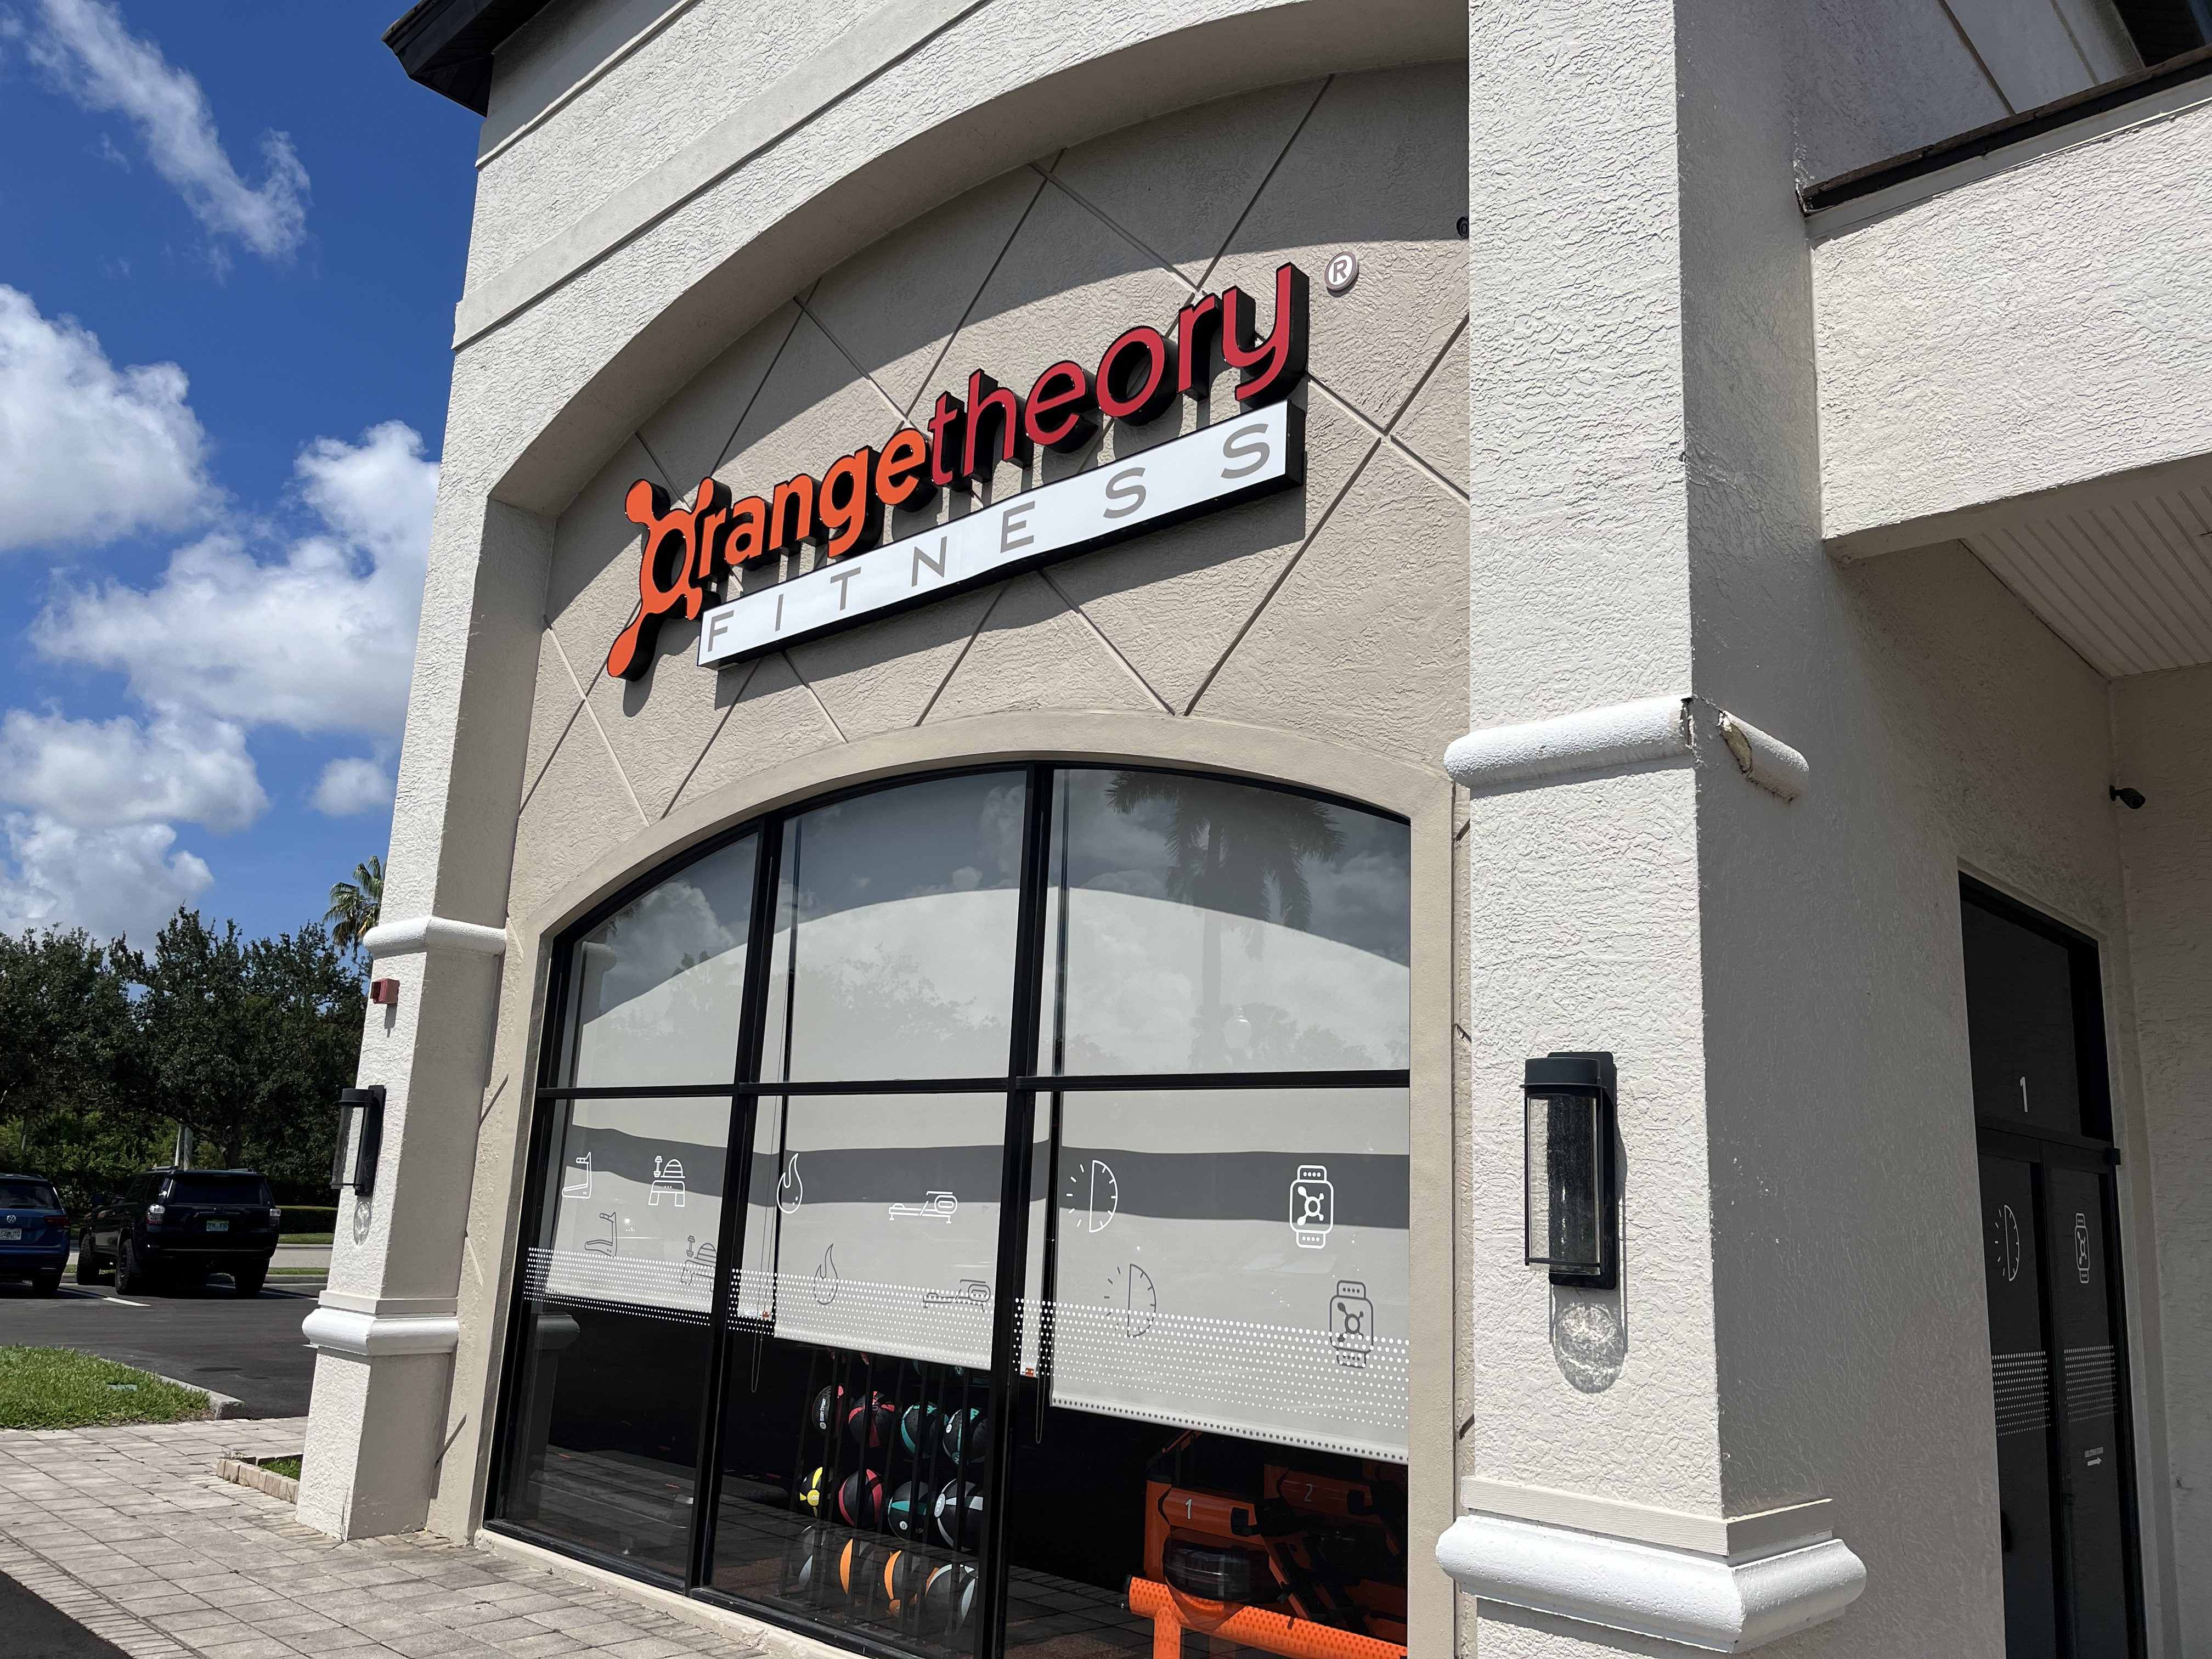 Team Kling' Brings New Orangetheory Fitness Location to the West